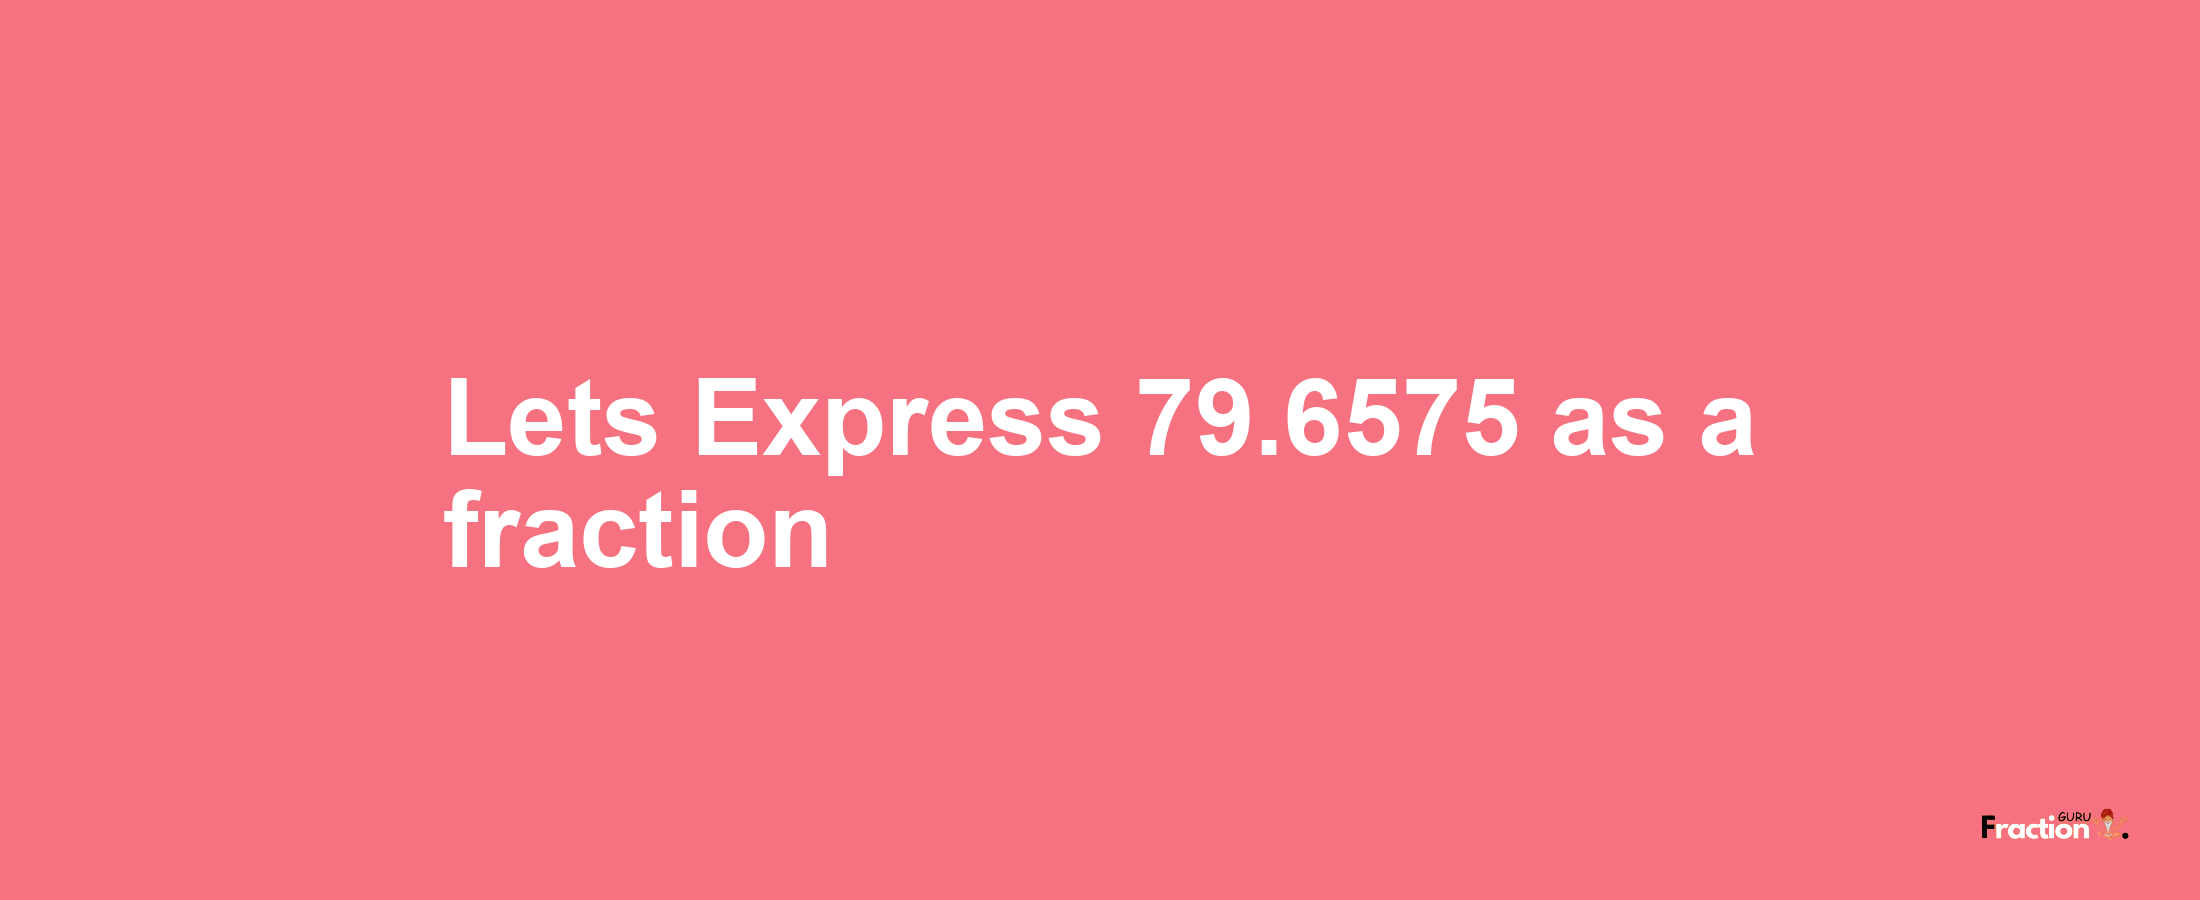 Lets Express 79.6575 as afraction